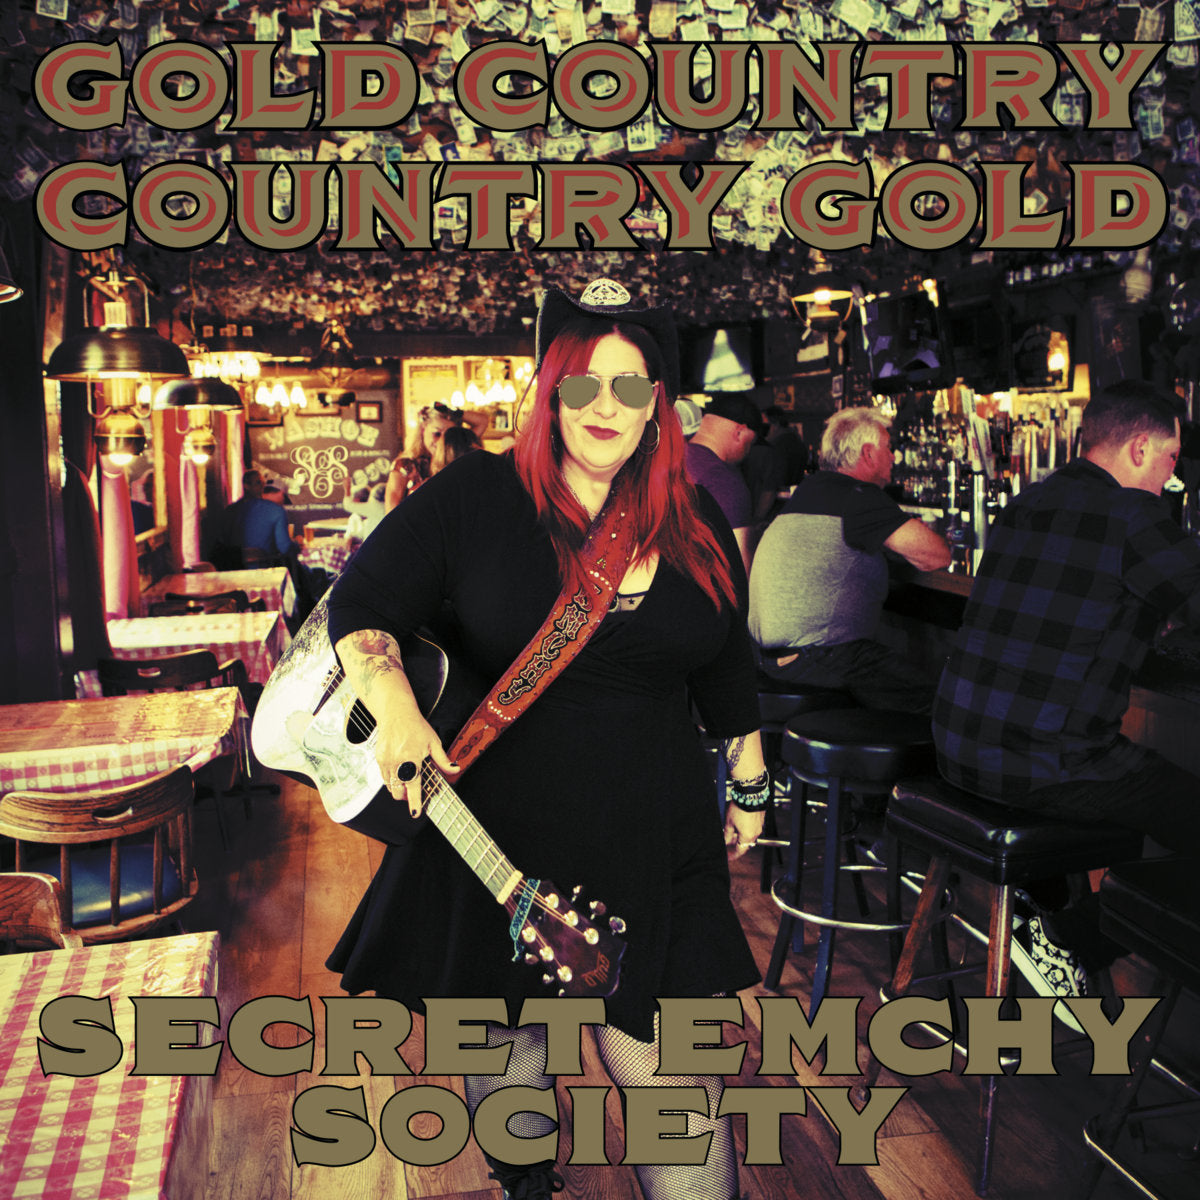 Secret Emchy Society - Gold Country / Country Gold LP